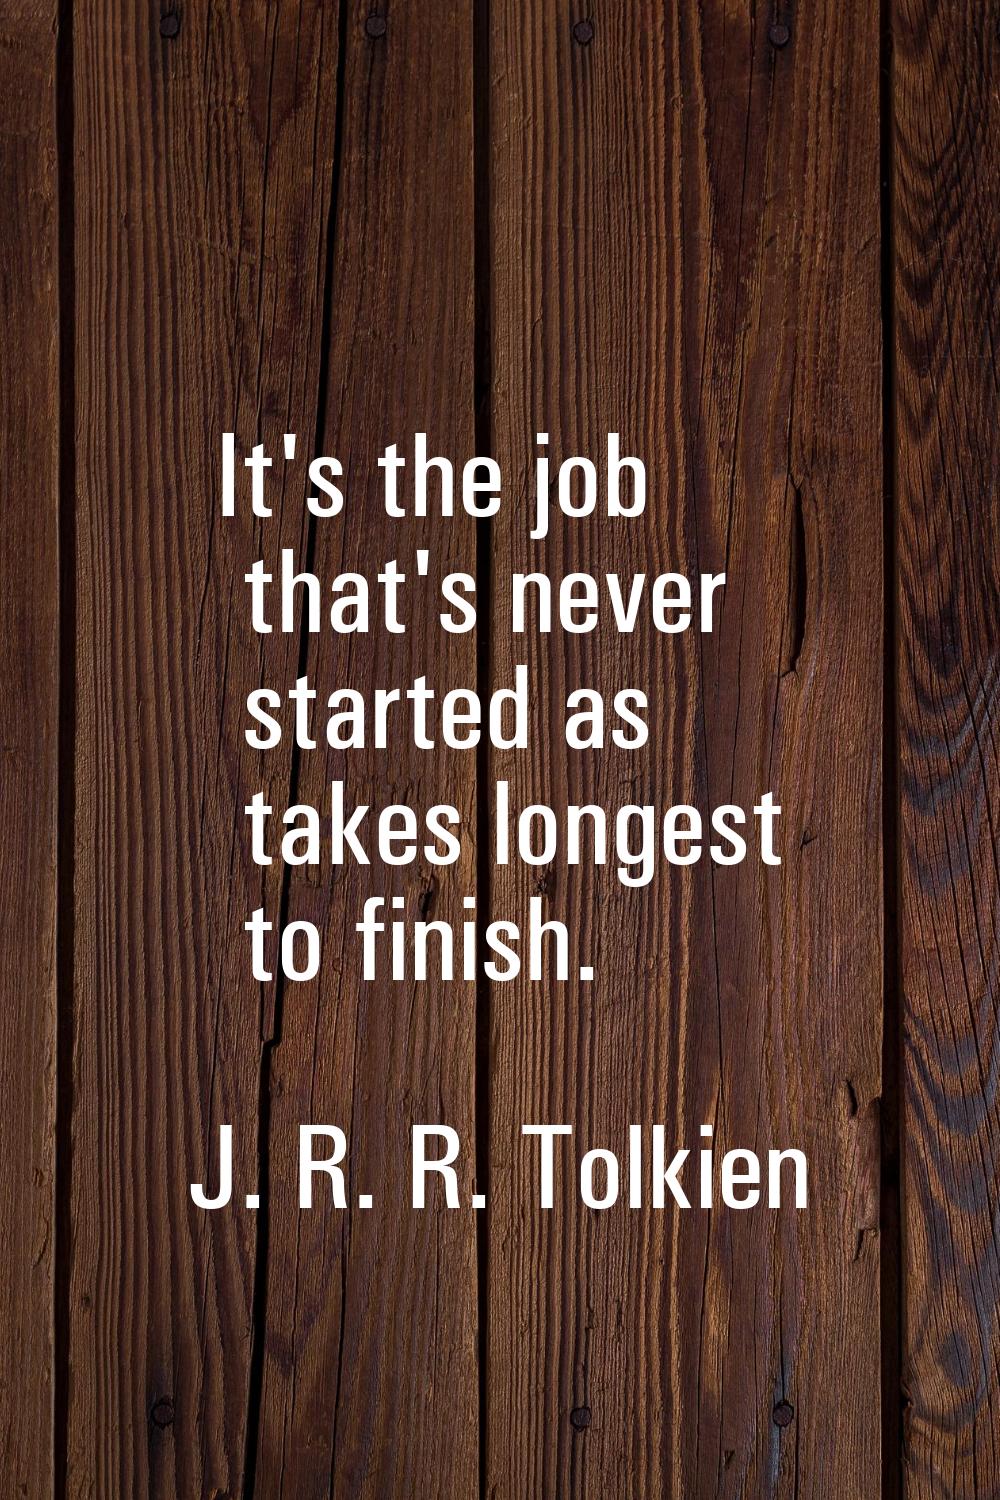 It's the job that's never started as takes longest to finish.